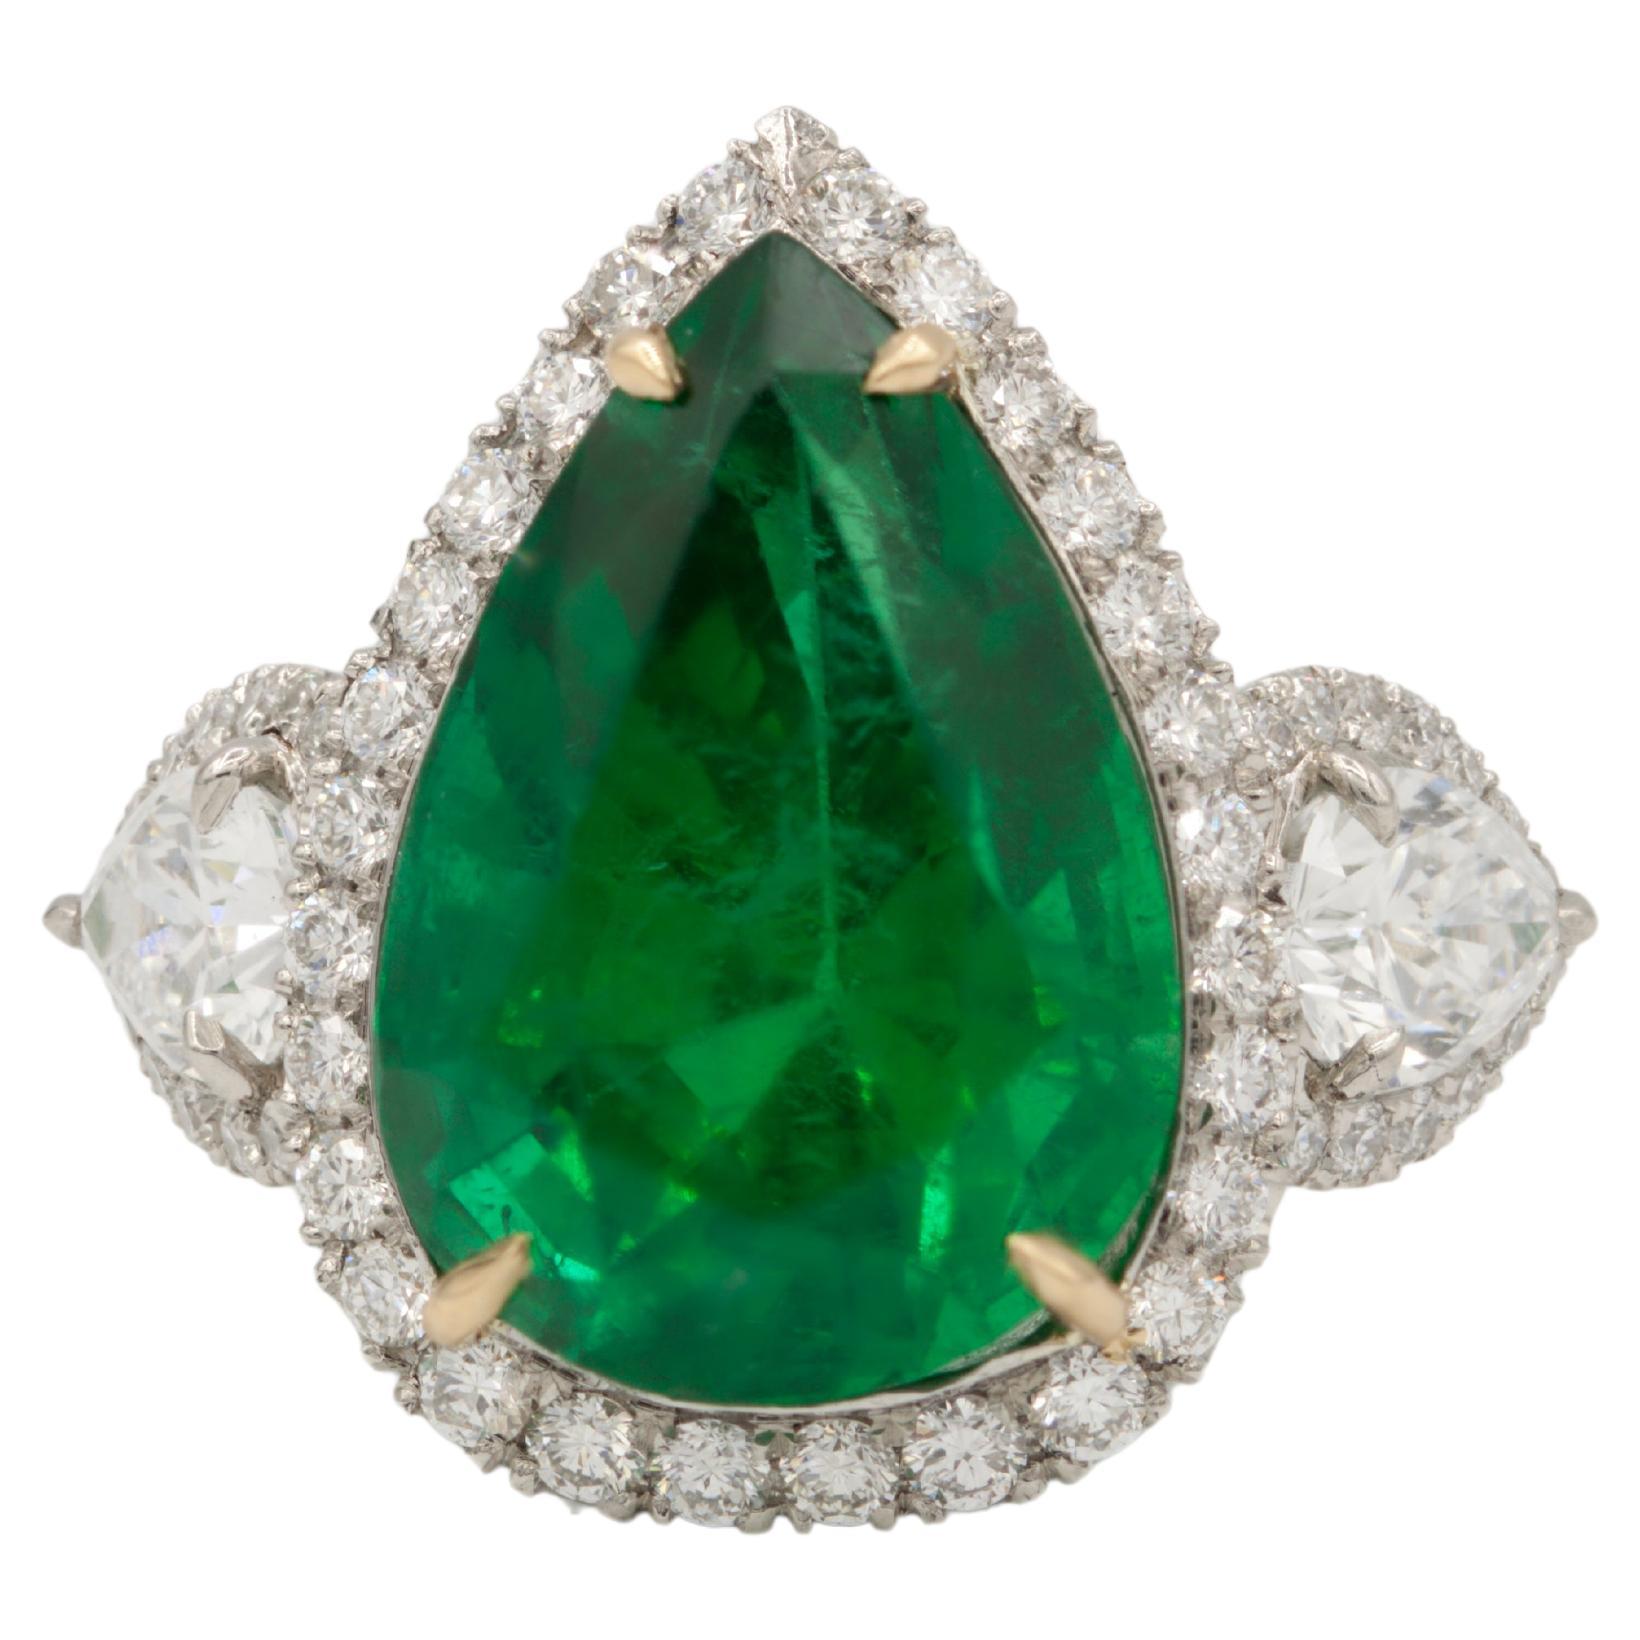 Exquisite in its design, this captivating ring boasts a stunning 8.78 ct pear-shaped green emerald, elegantly set in a luxurious combination of platinum and 18kt yellow gold. Flanking the emerald are two pear-shaped diamonds, each certified by GIA